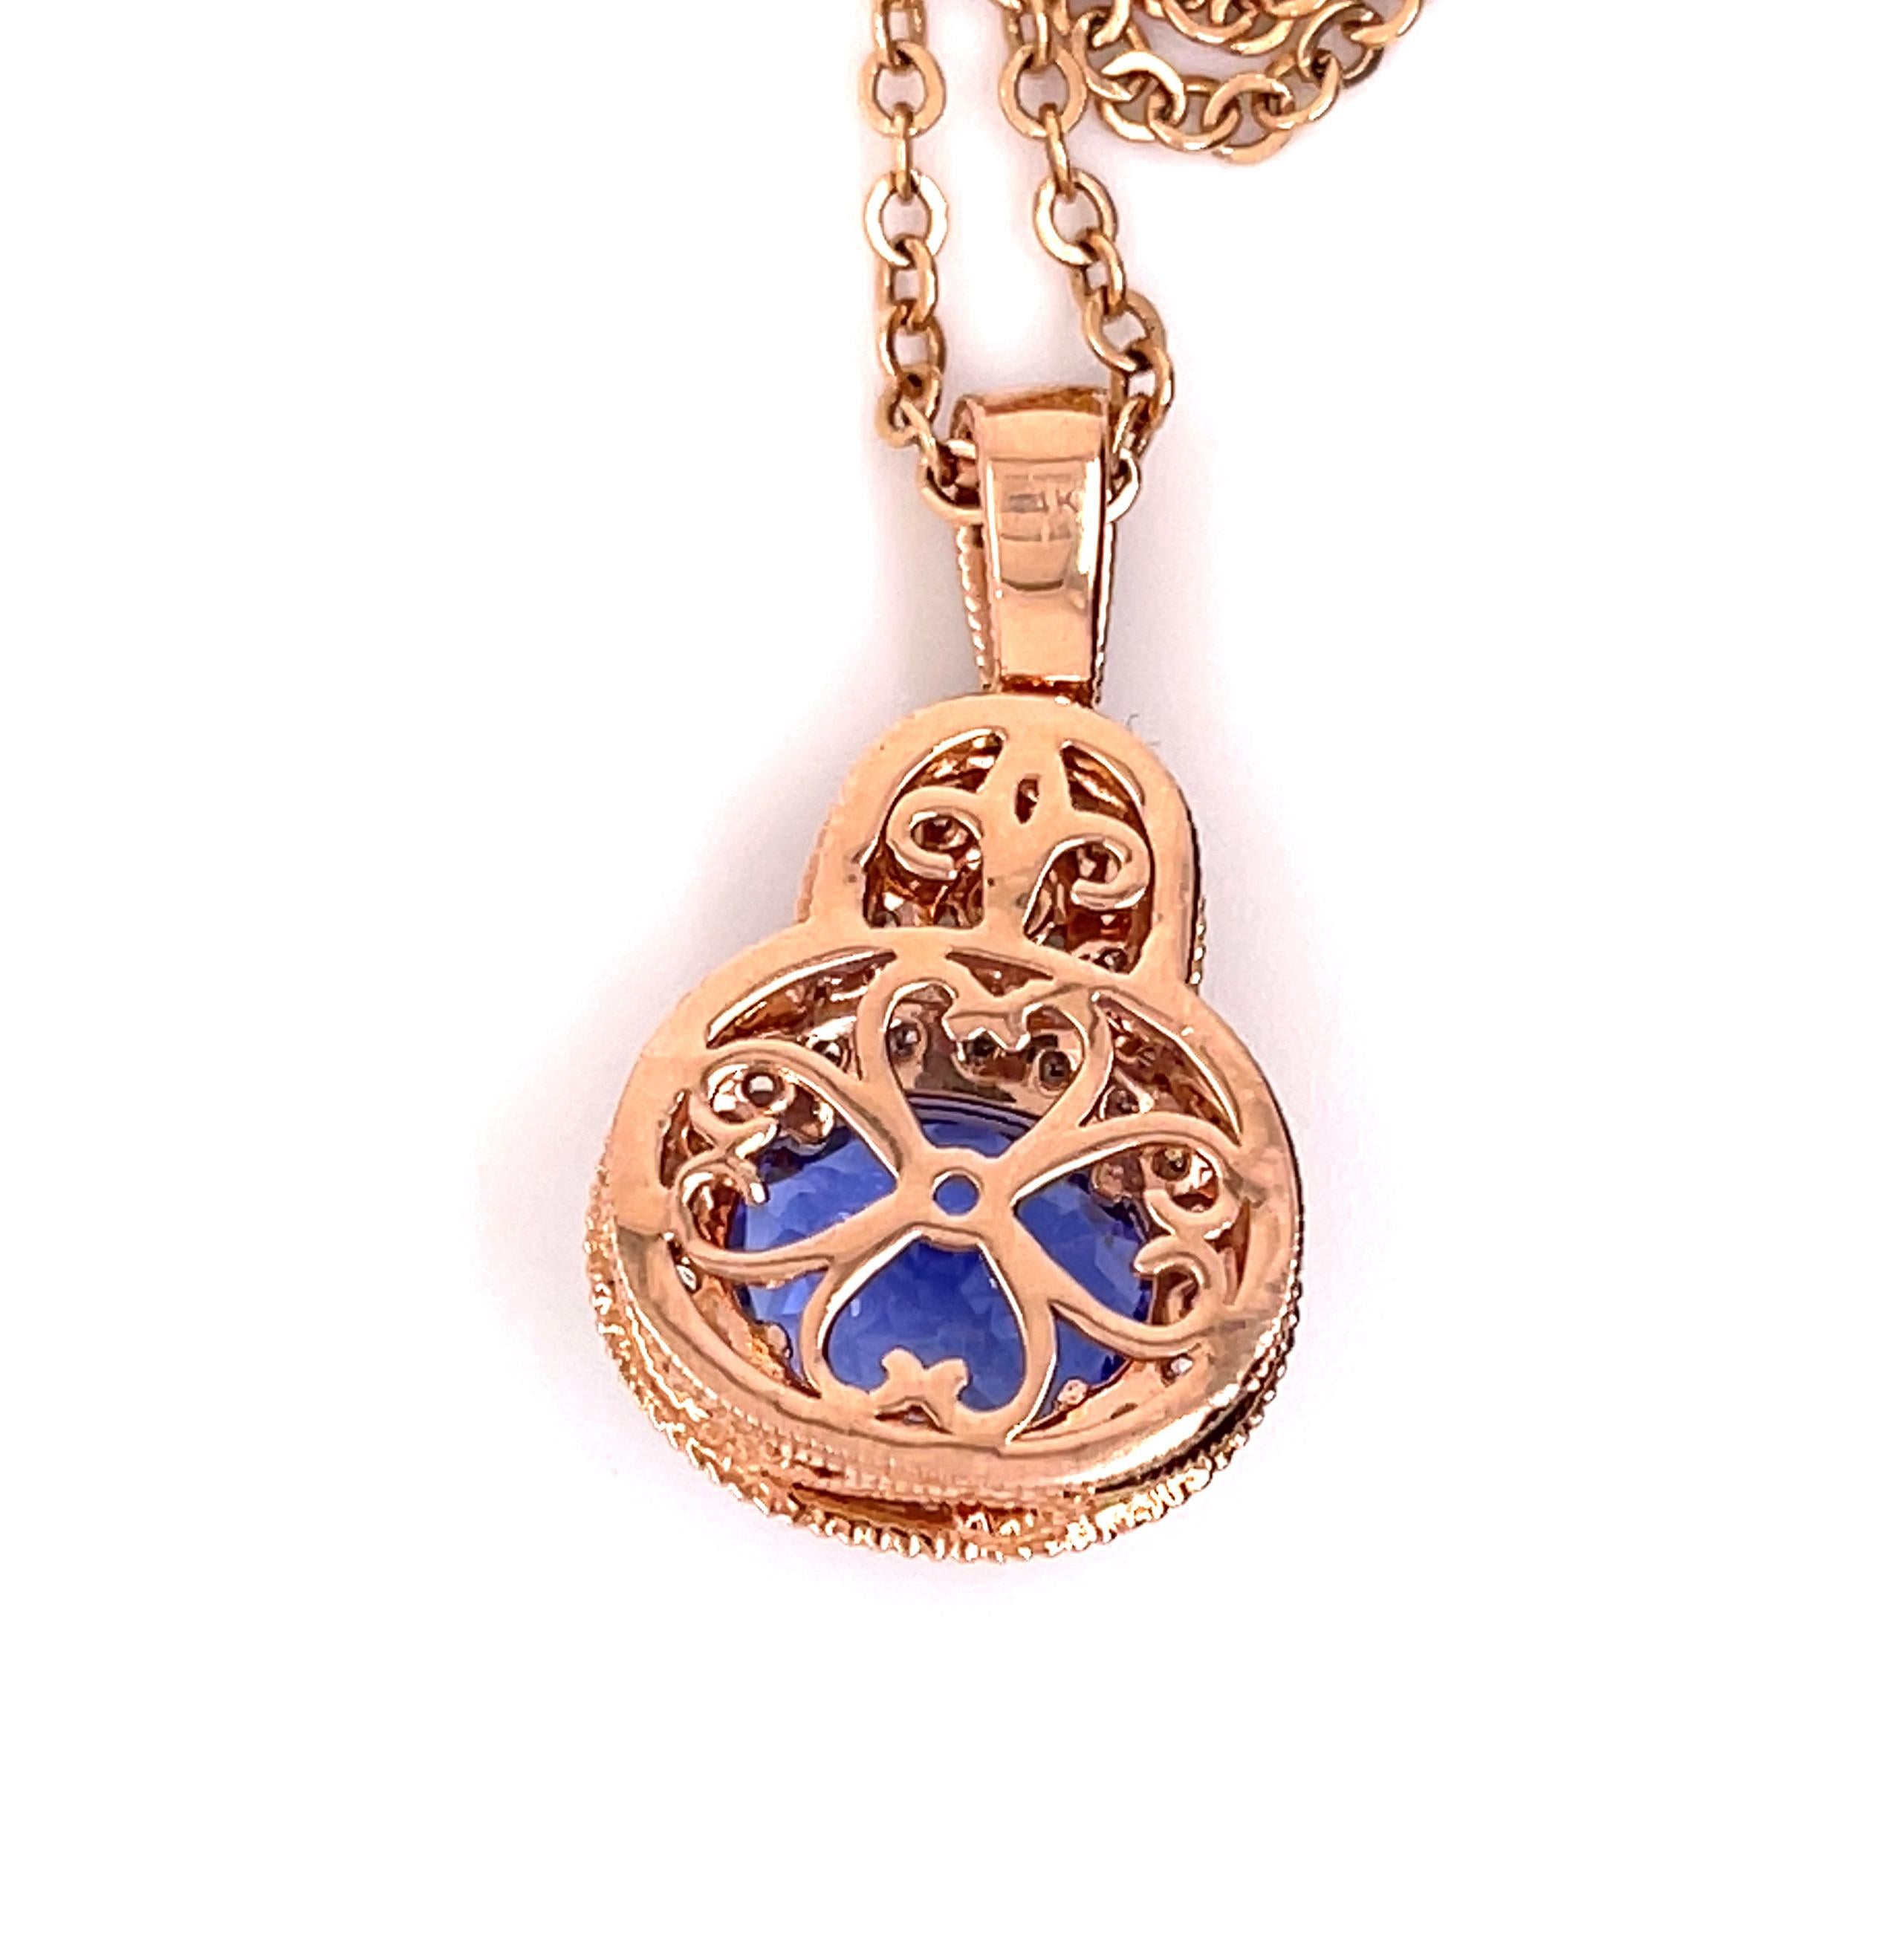 This nice violet-blue 3.74 carats Tanzanite is set in 14-karat rose-gold with a beautifully designed basket setting and four prongs. The Tanzanite is accented with 33 brilliant-cut round diamonds. The back of the pendant has a beautiful heart